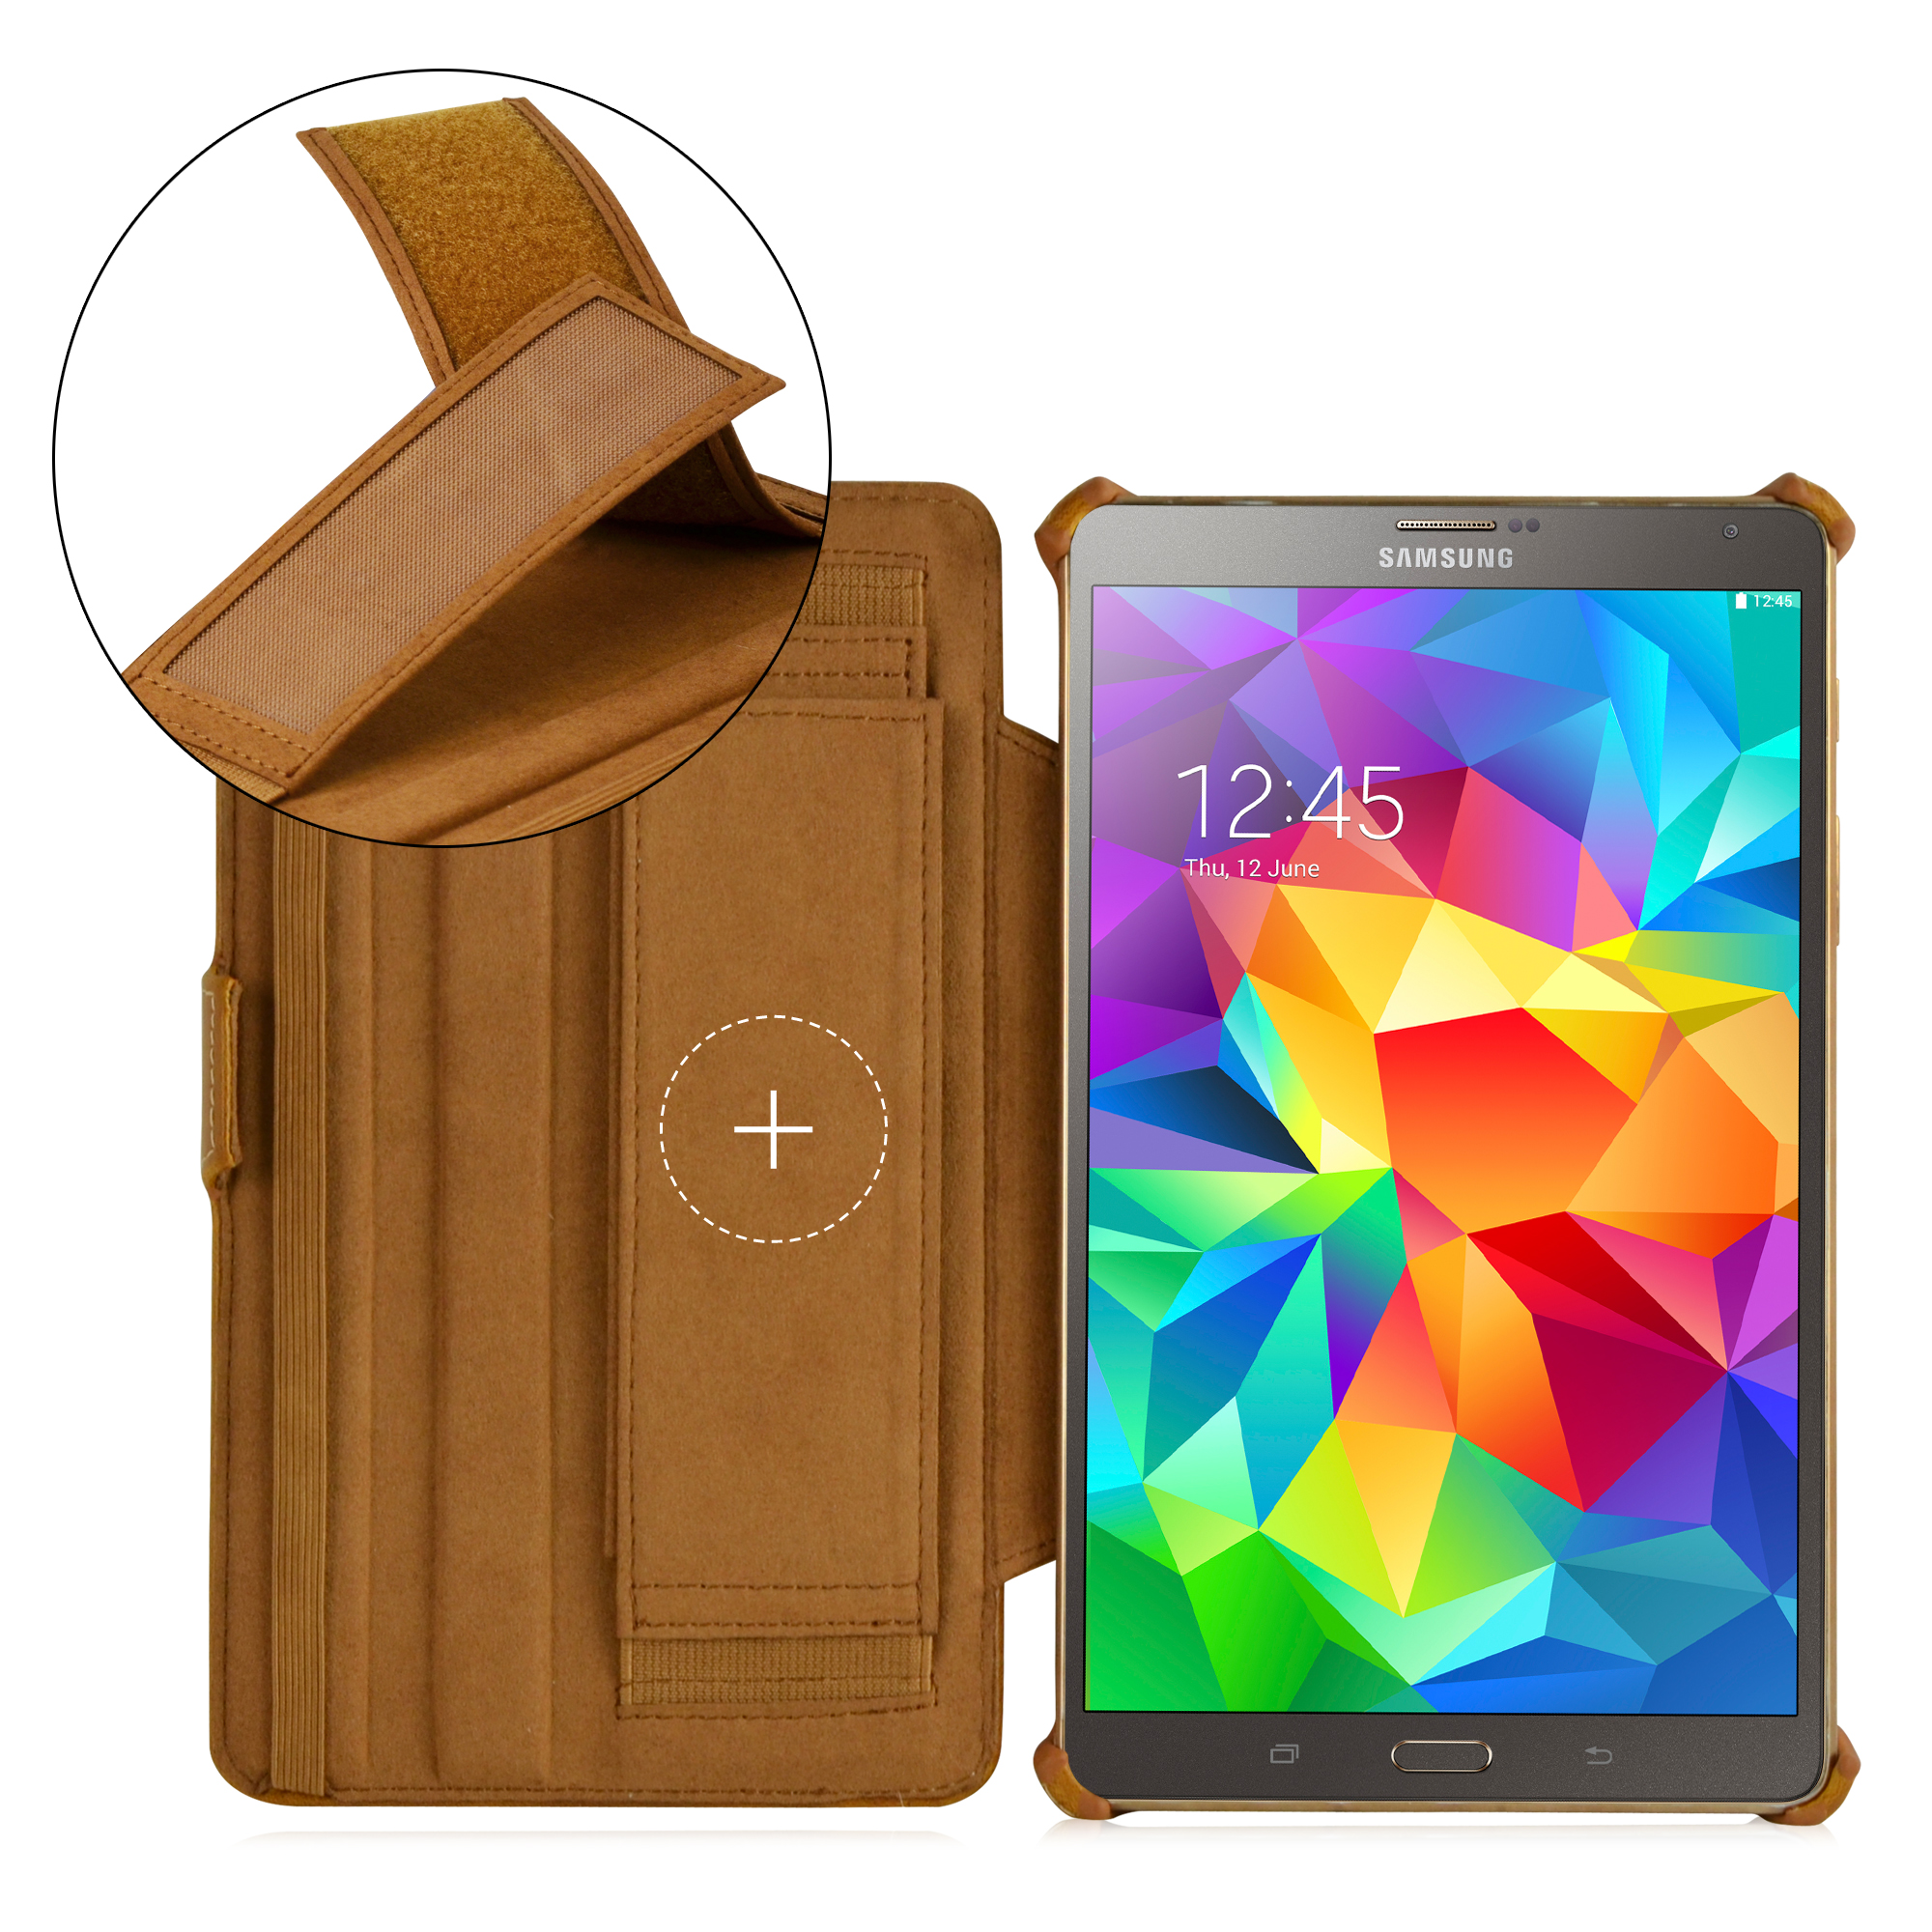 8.4" Tablet PC Sleeve Case Bag Cover for Samsung Galaxy Tab S 8.4 Tab Pro 8.4 